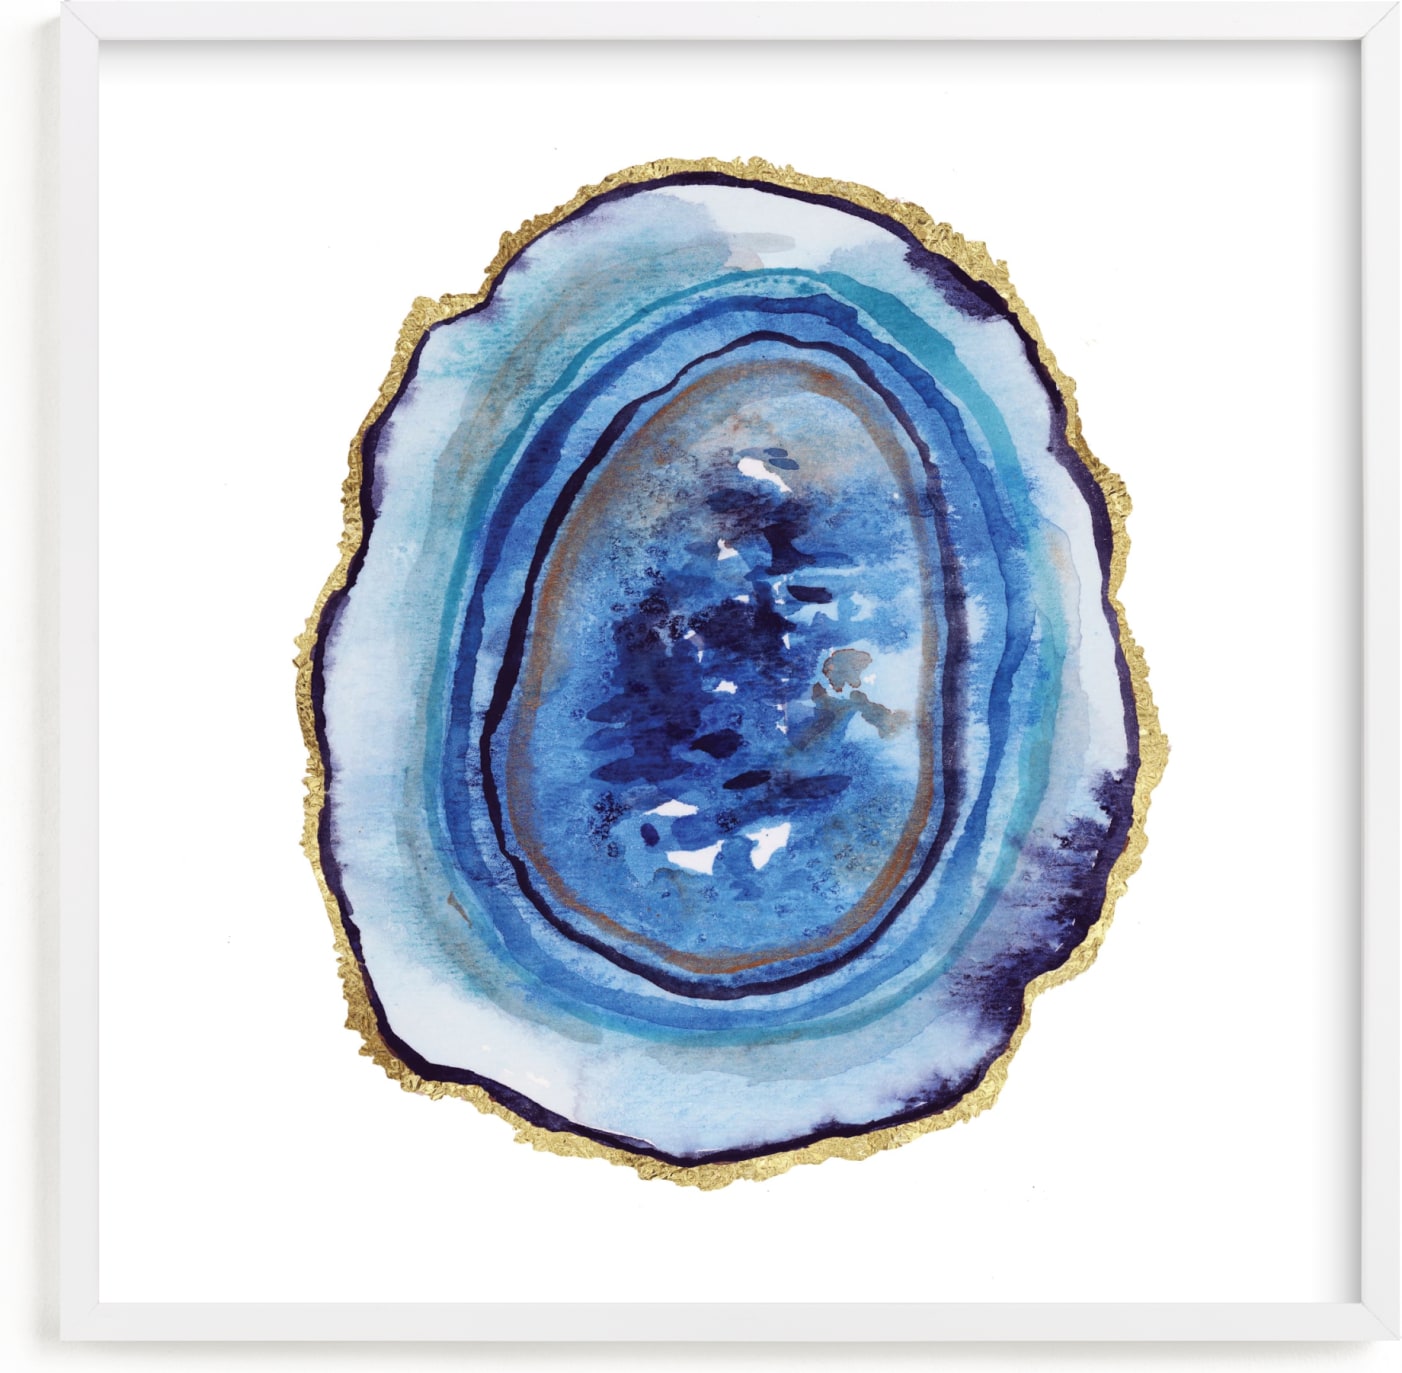 This is a blue art by Kelsey McNatt called Sliced.